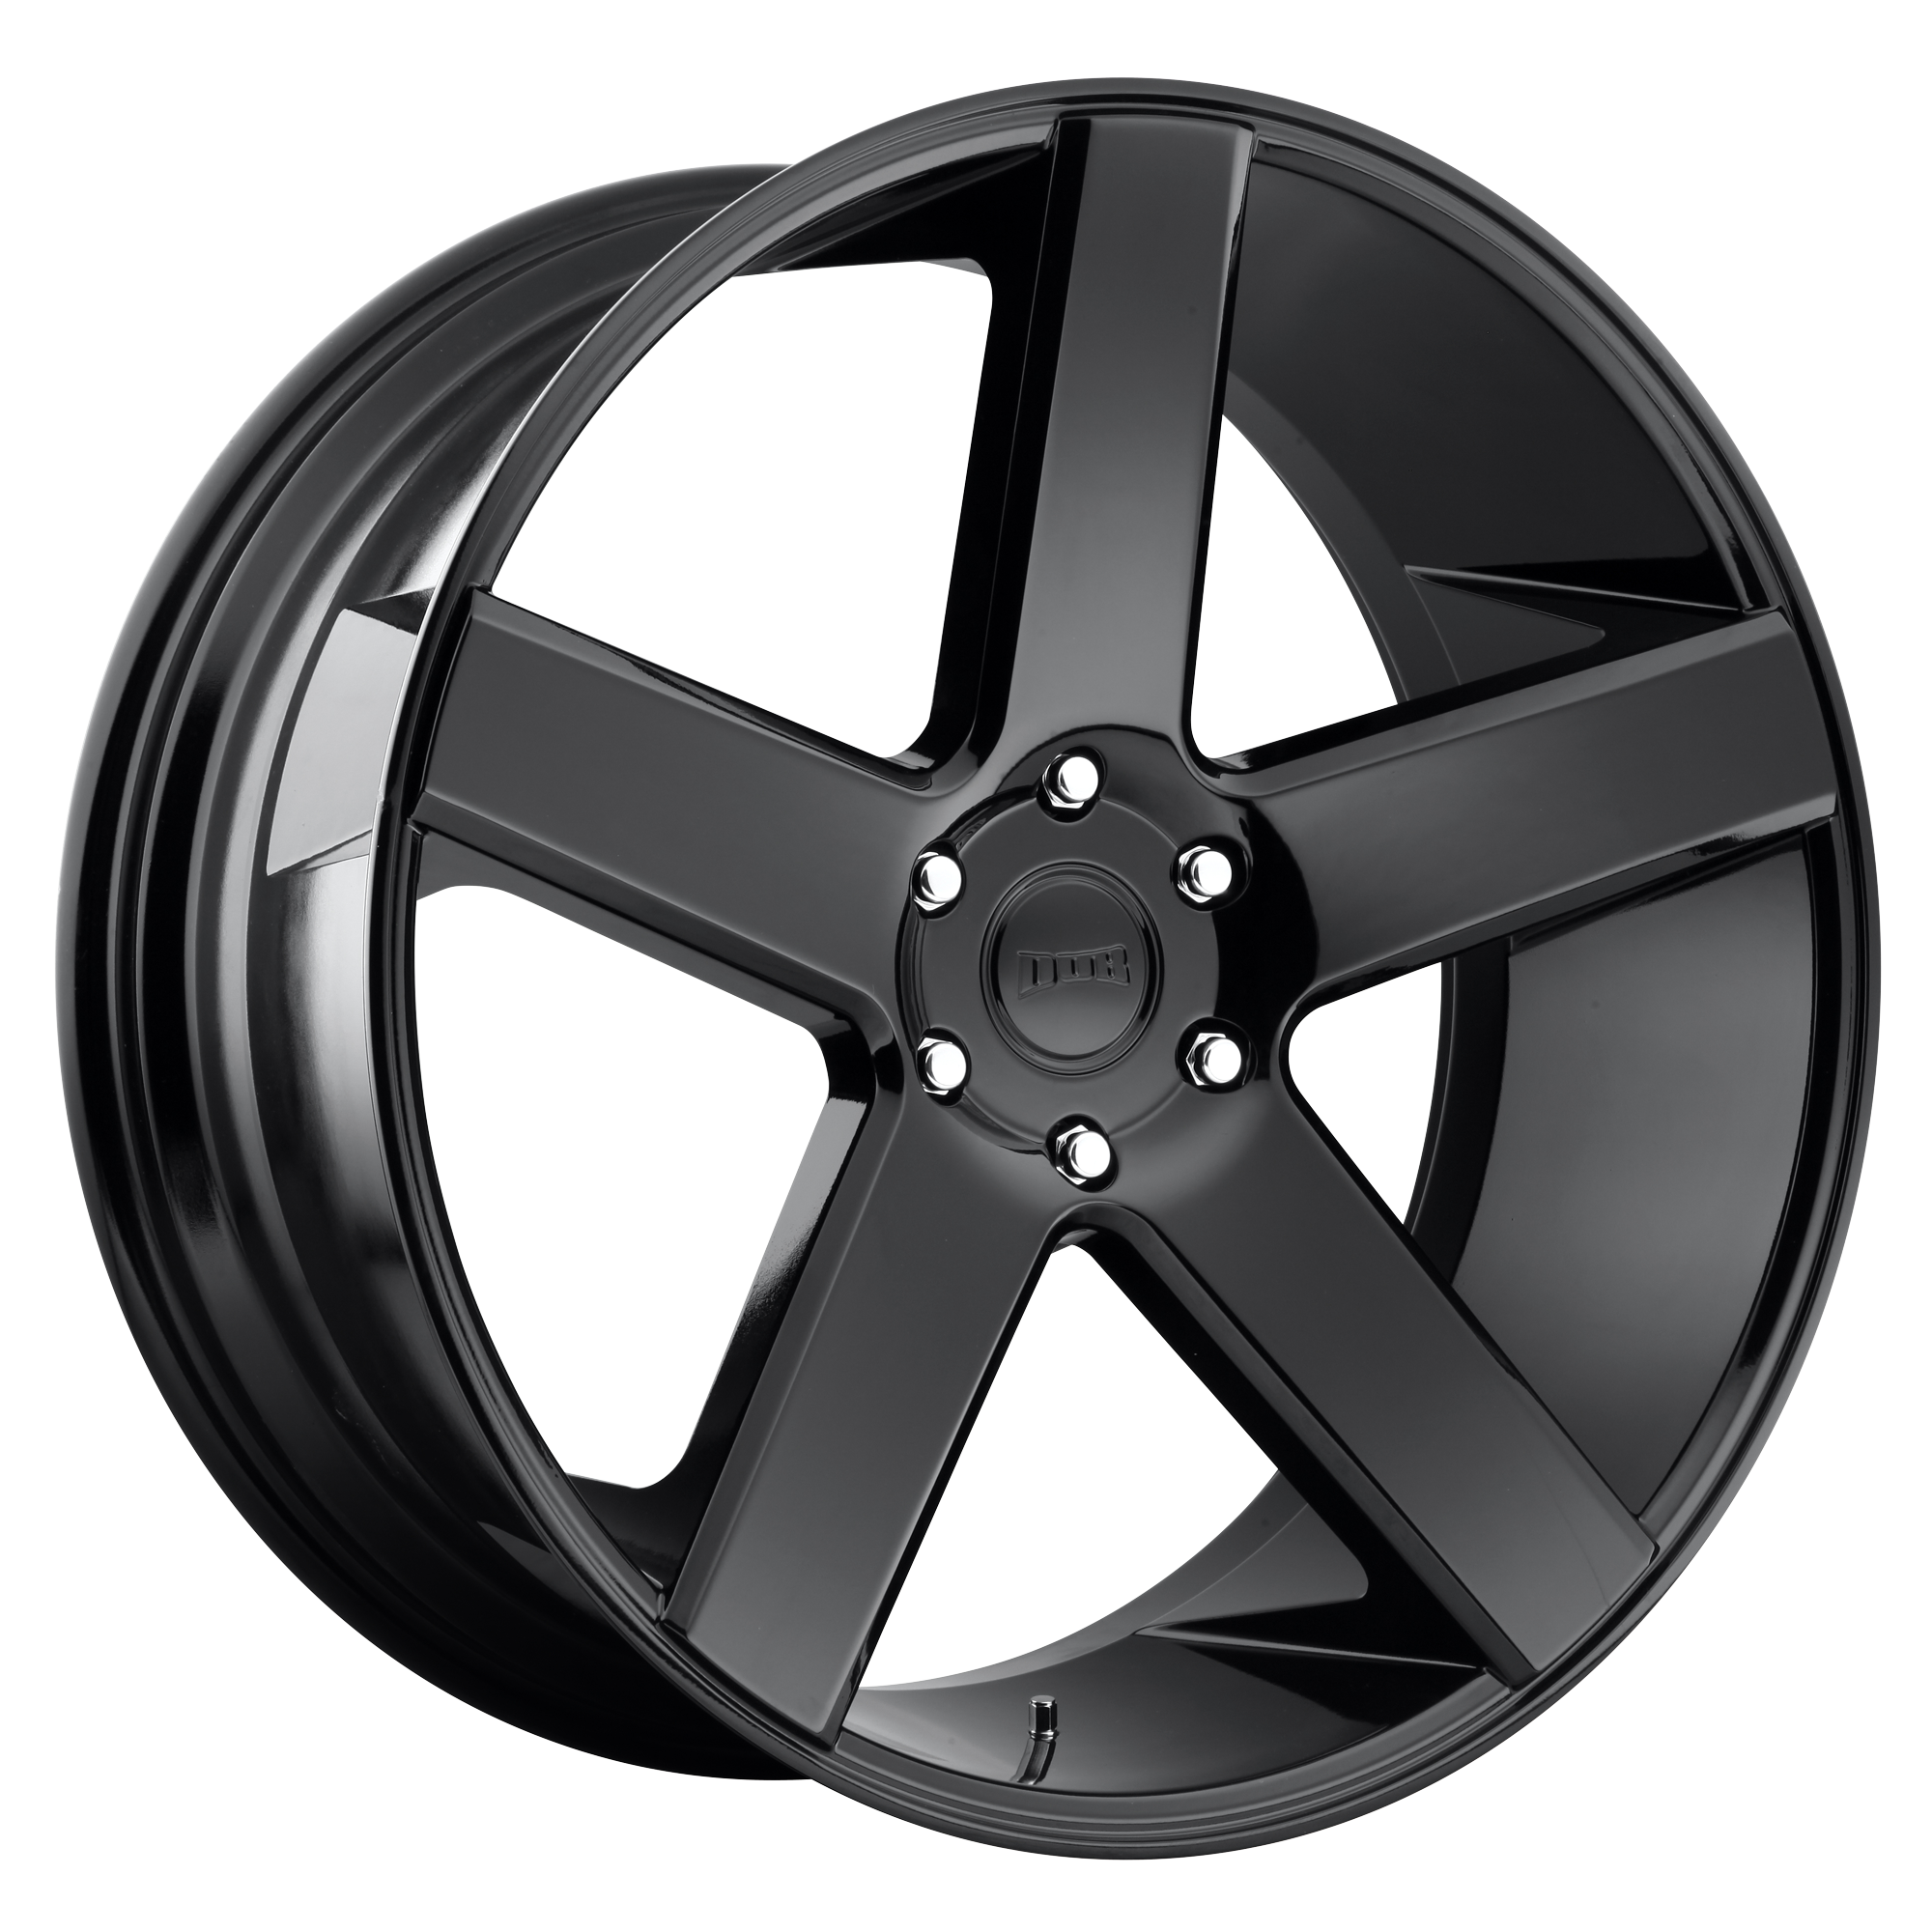 BALLER 22x9.5 5x150.00 GLOSS BLACK (32 mm) - Tires and Engine Performance